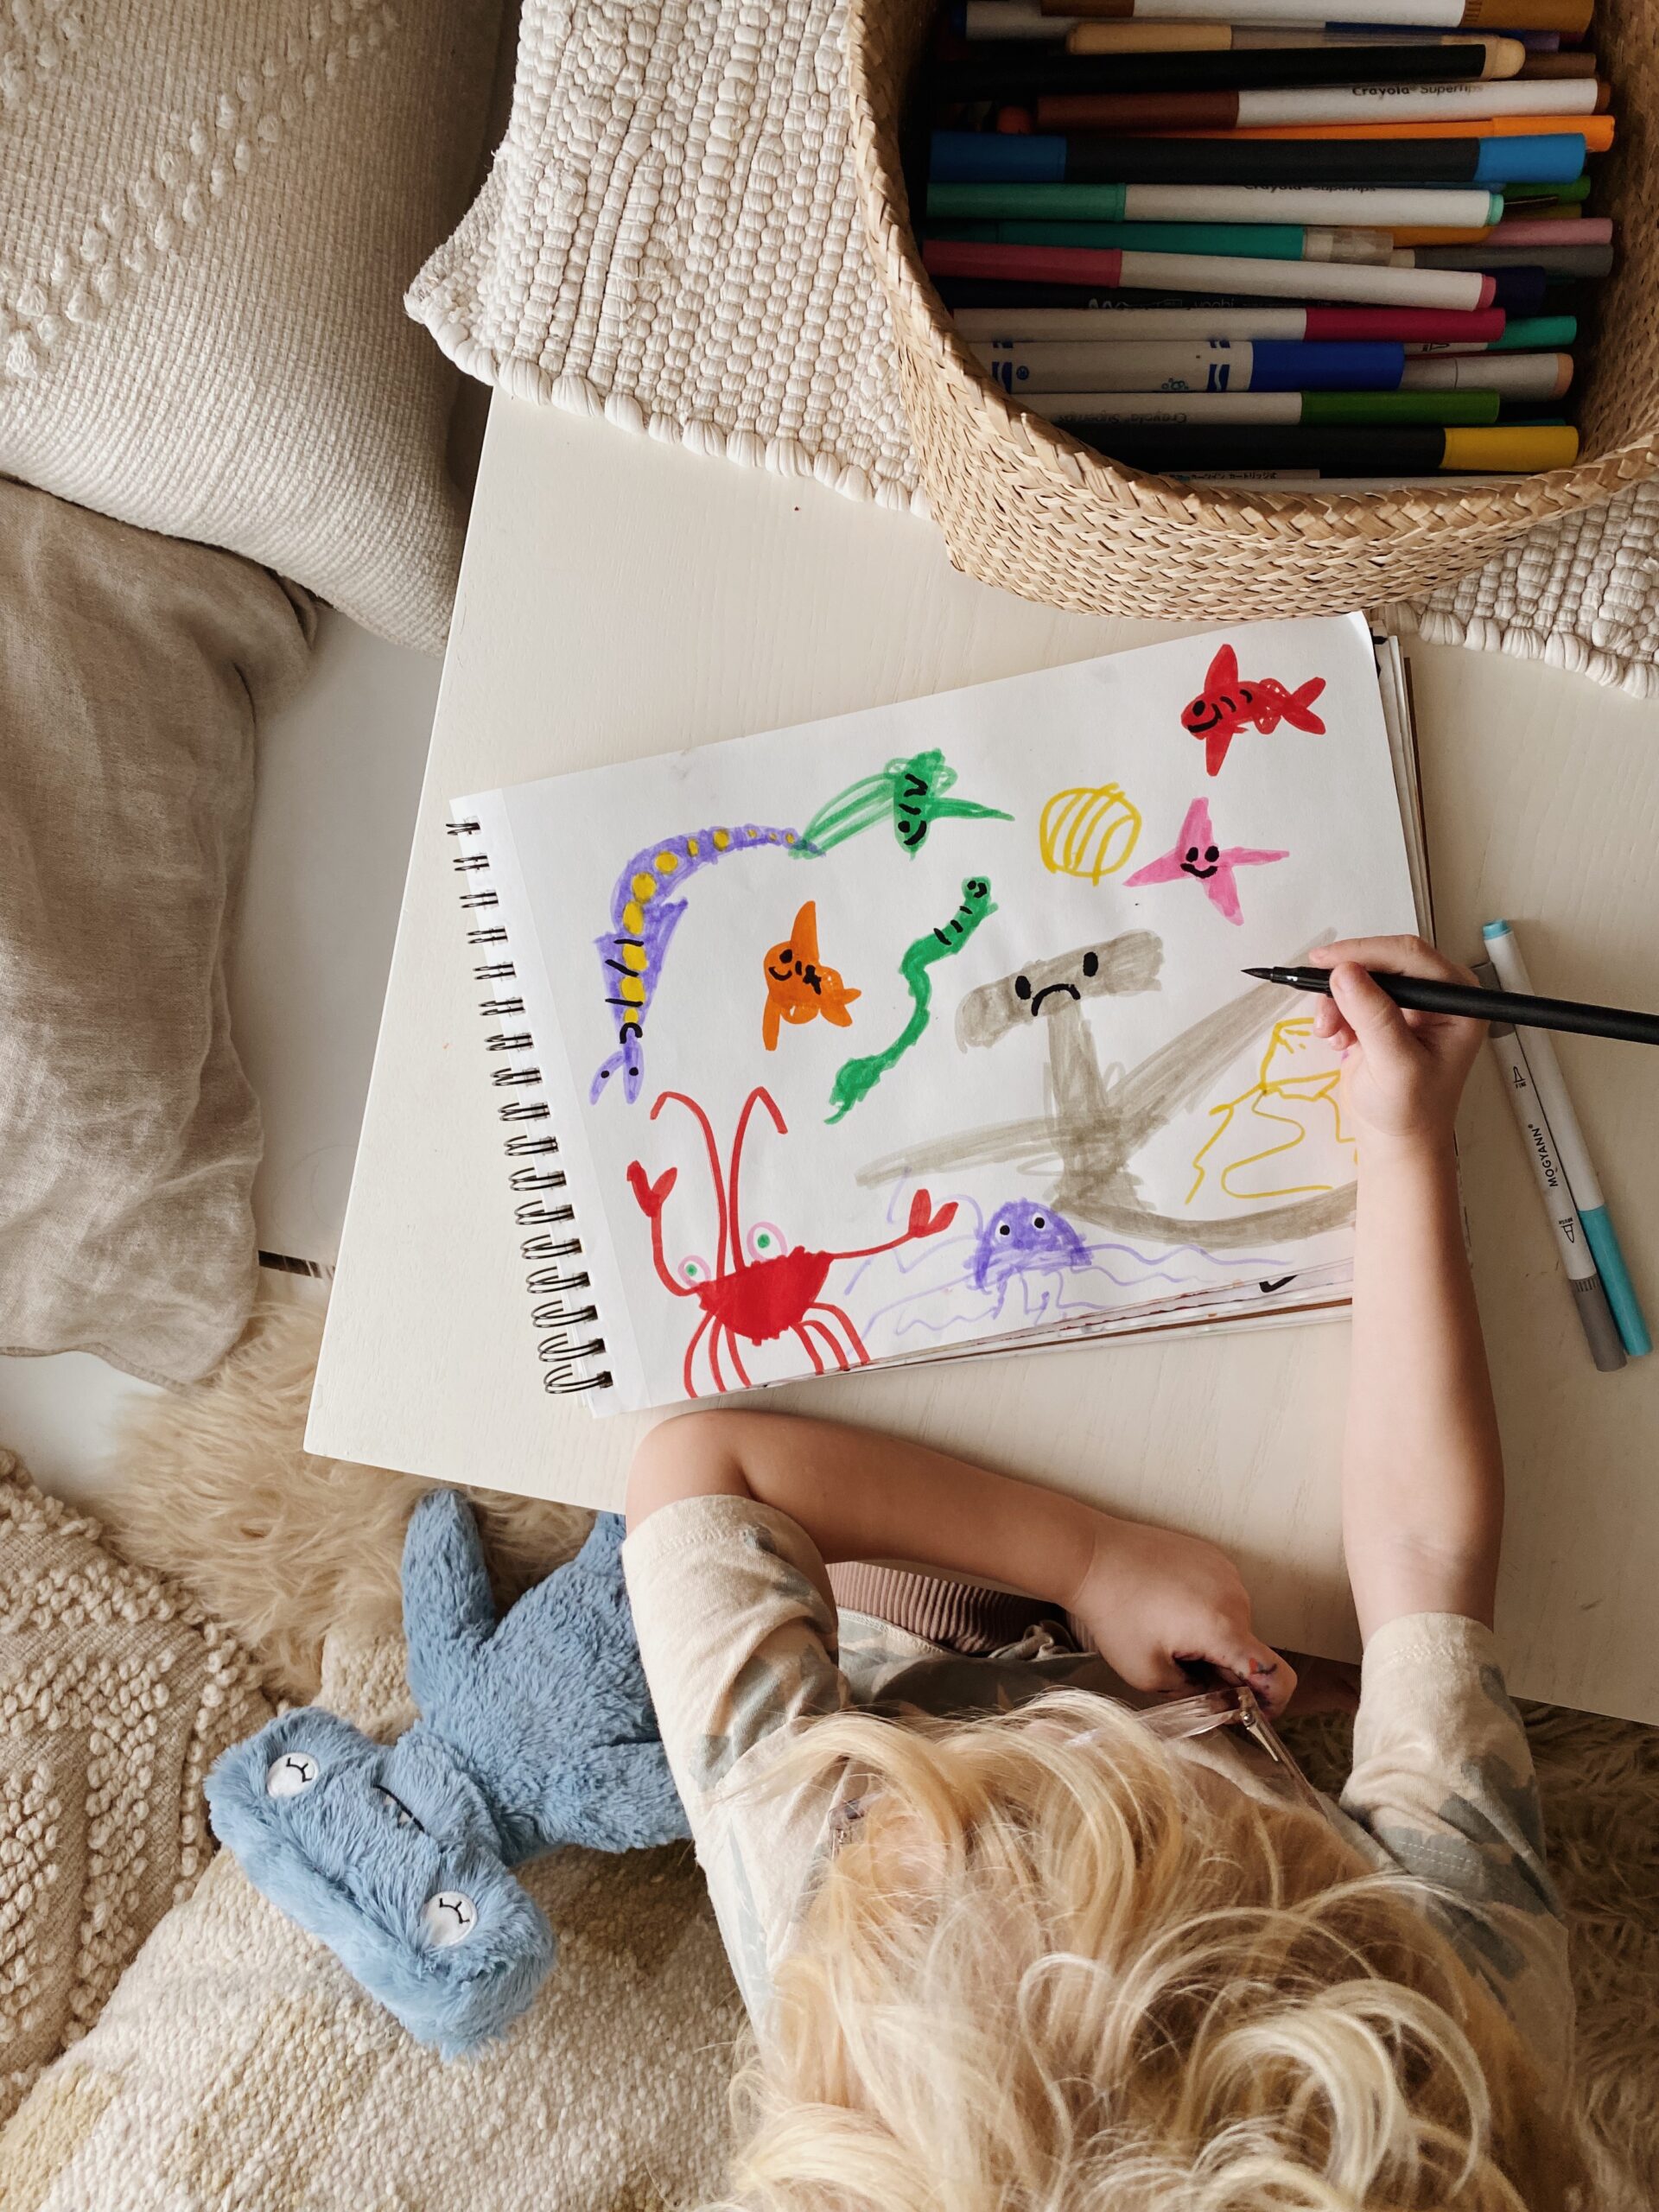 Sketchbooks and Little Kids - The Sweeter Side of Mommyhood